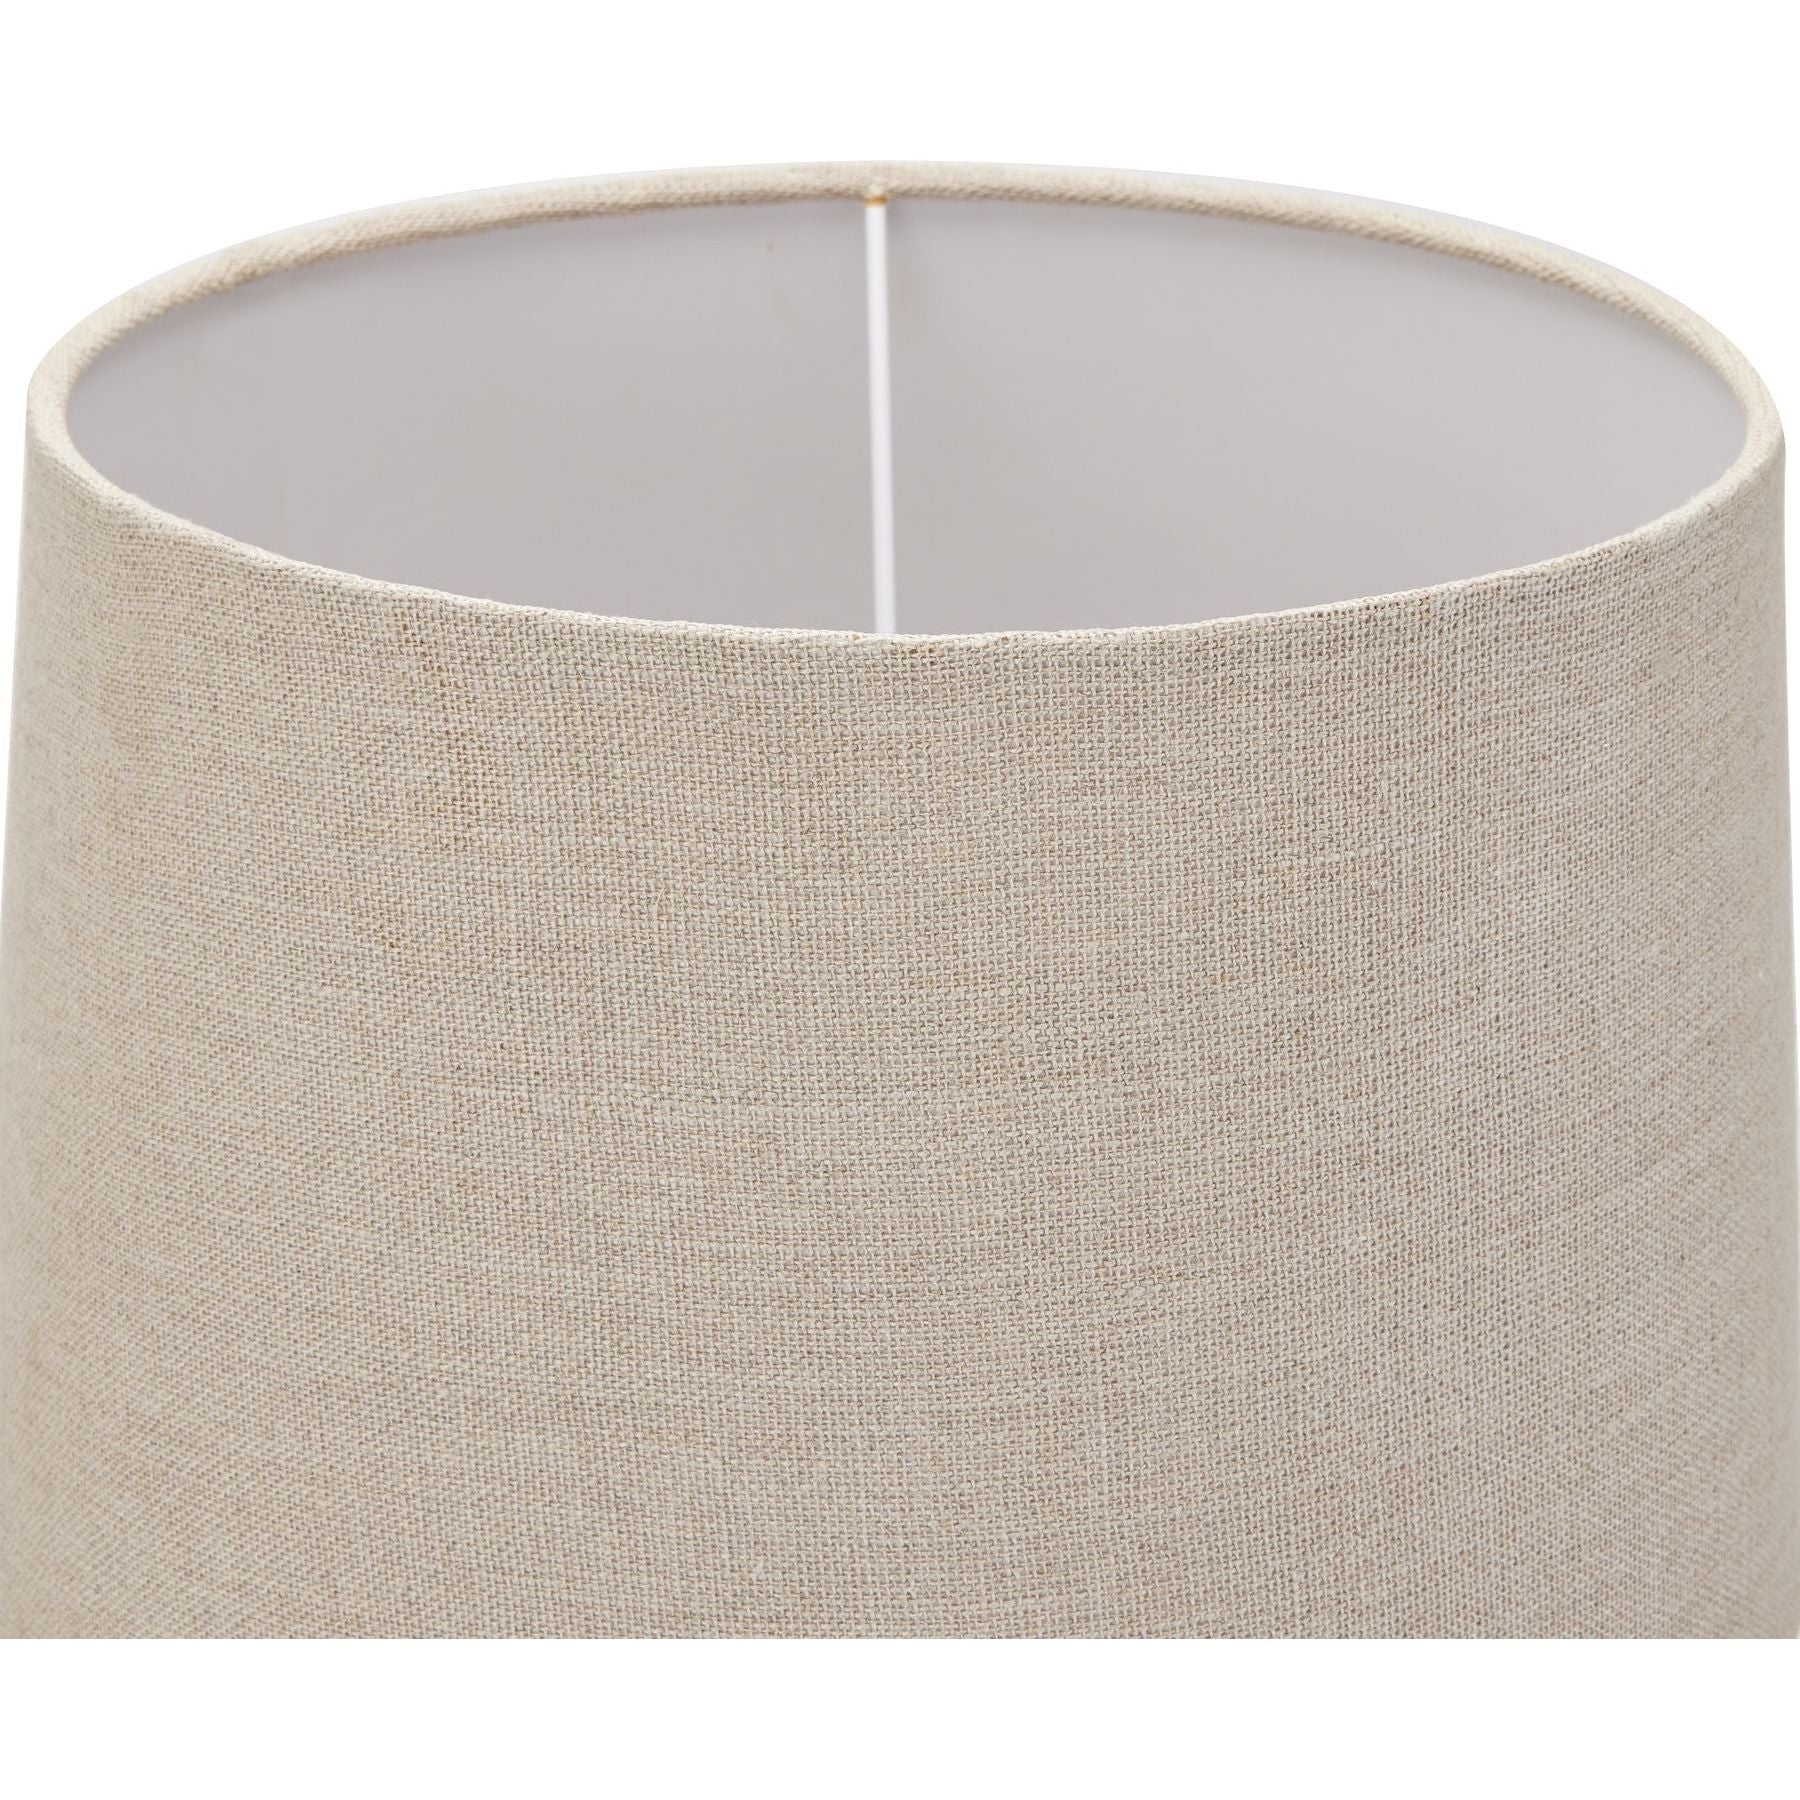 Delaney Natural Wash Candlestick Lamp With Linen Shade - Ashton and Finch